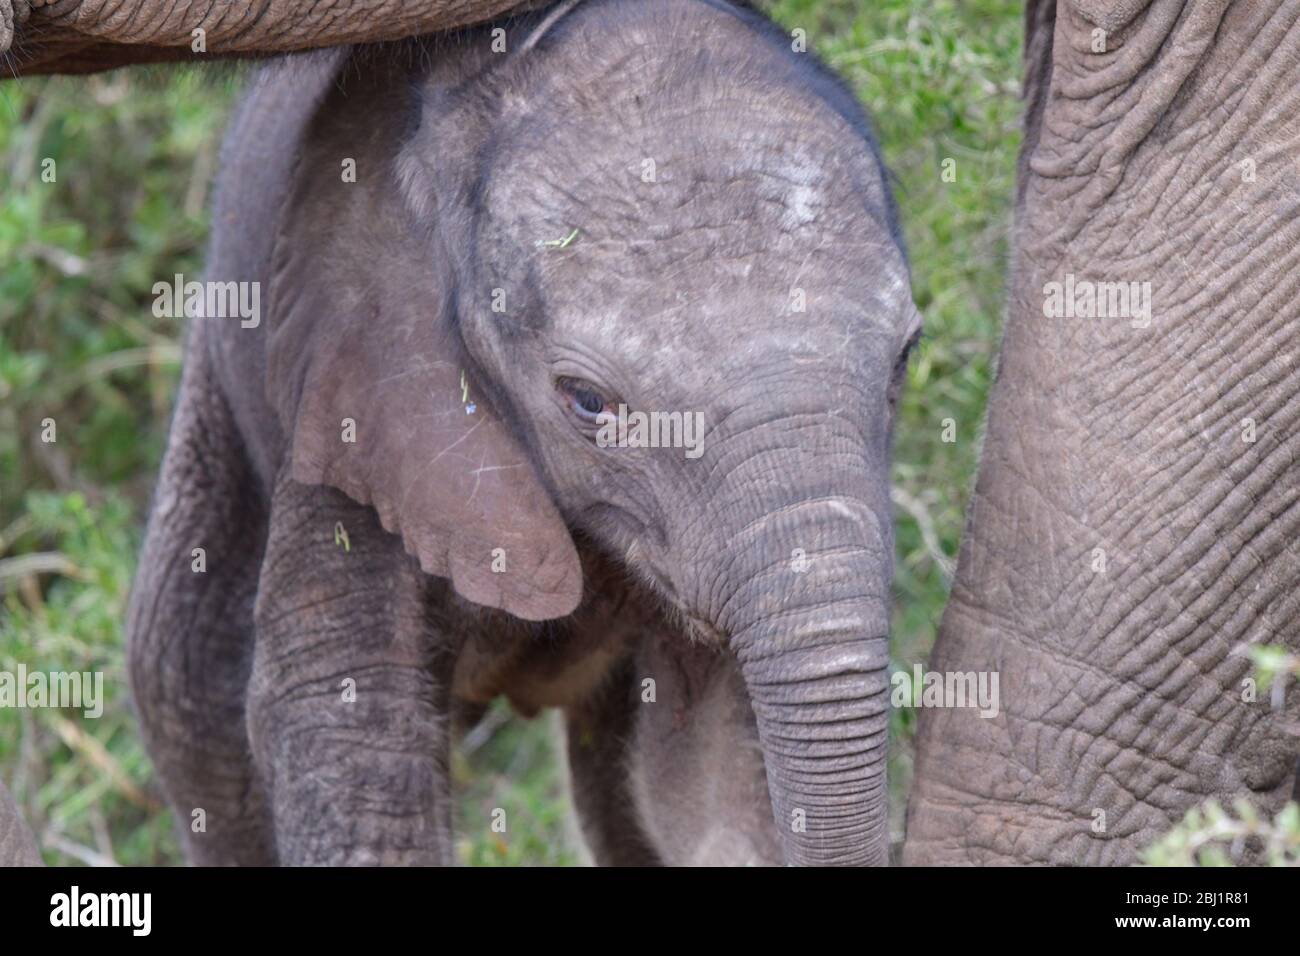 Natural life in Africa. African elephant Loxodonta africana in Kruger National Parkclose-up Stock Photo